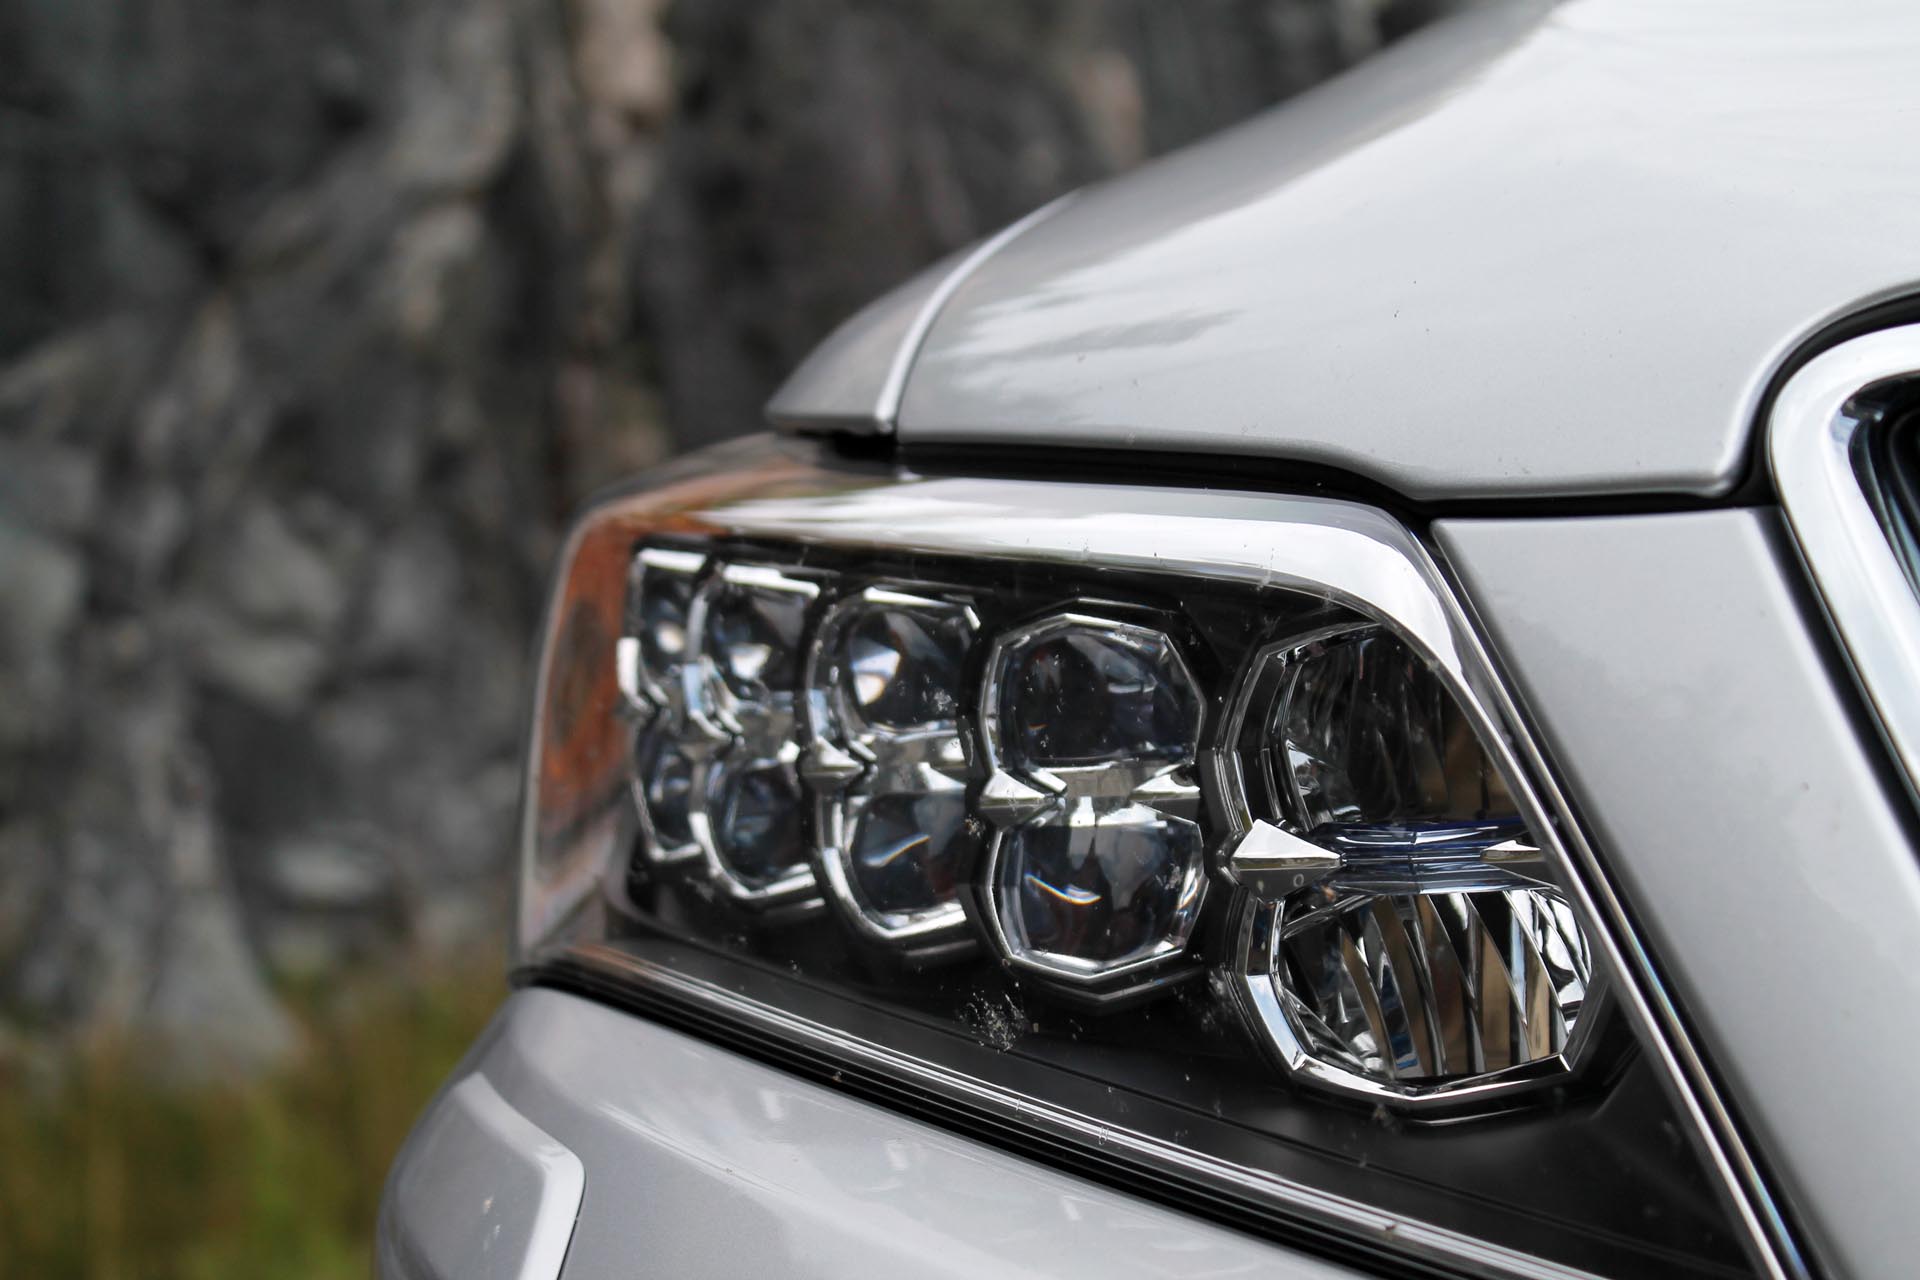 Here’s a new Acura, and its signature “Jewel Eye” headlamps. Using LED technology, the automaker has created a unique looking headlight that turns heads while offering great forward illumination in the process. Each square-shaped segment houses a powerful LED cluster inside.